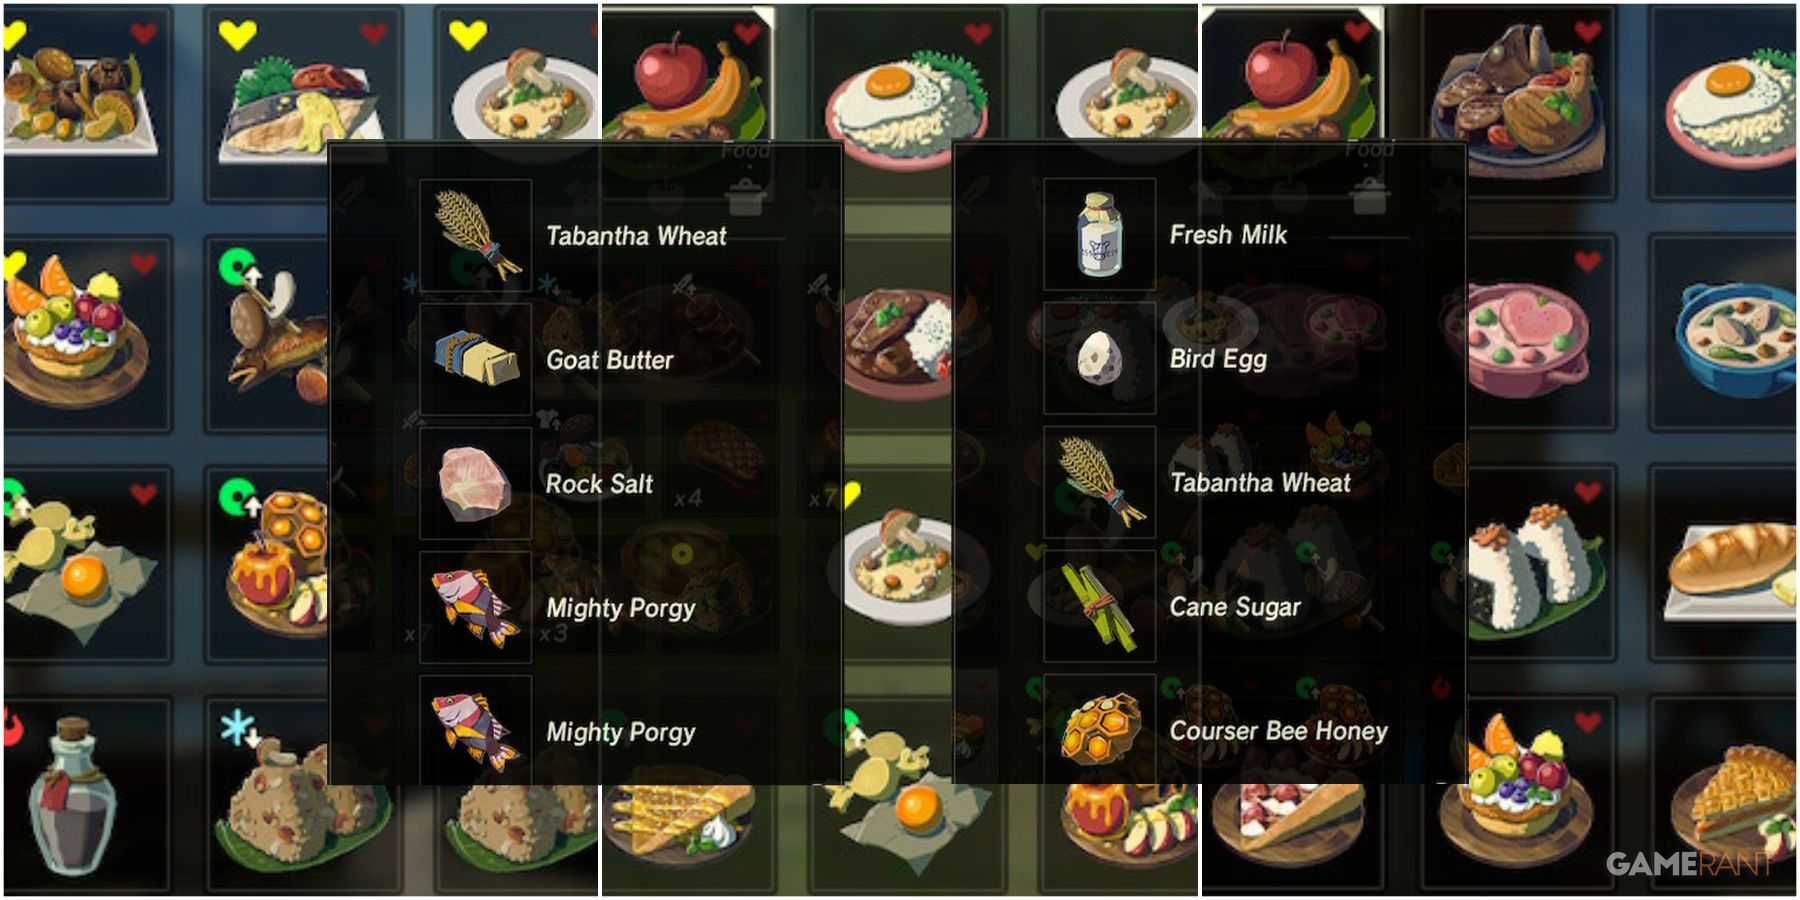 All Recipes and Cookbook - The Legend of Zelda: Breath of the Wild